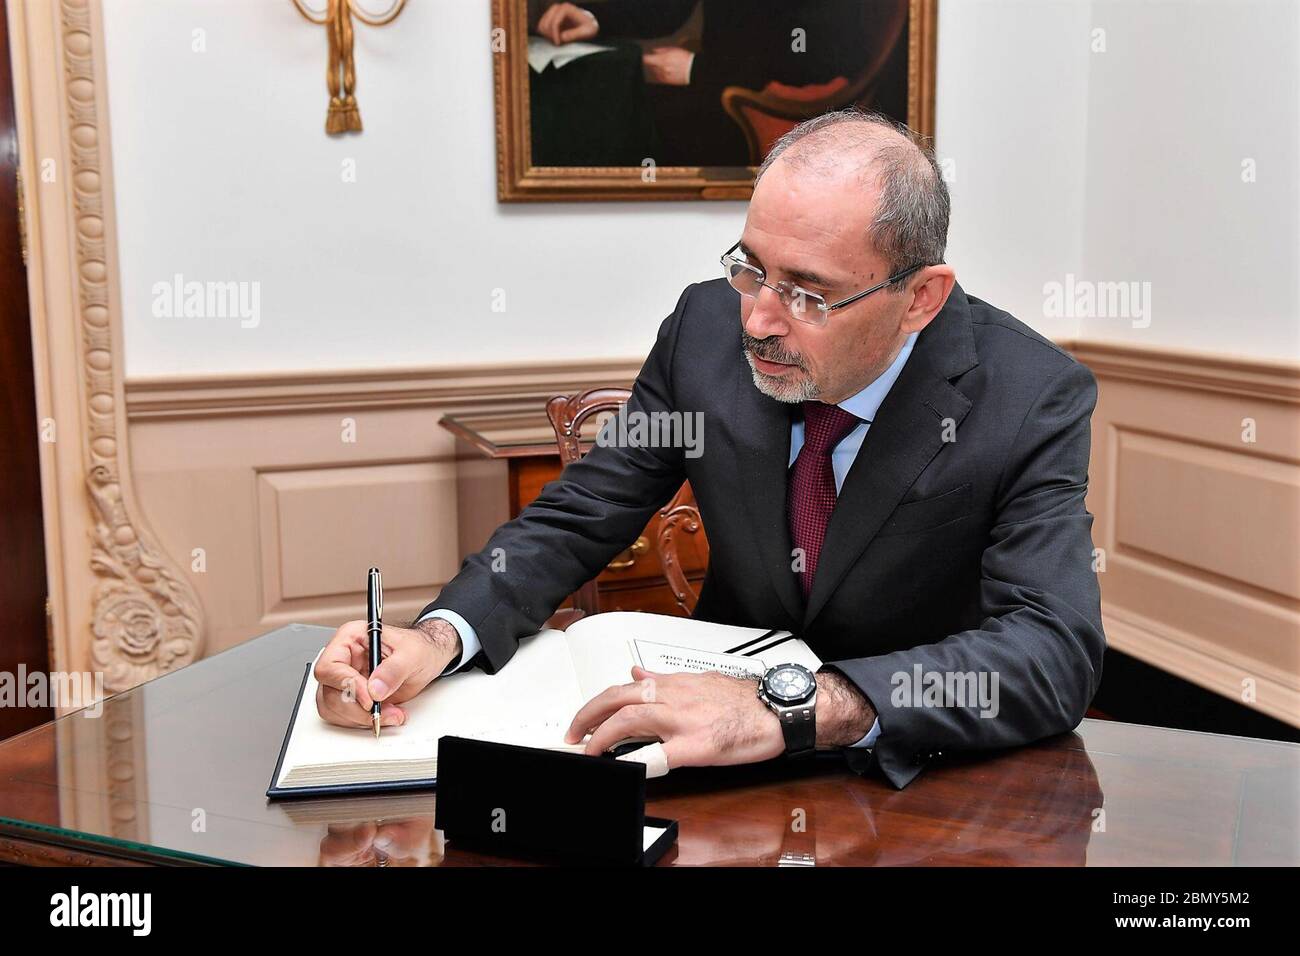 Jordan Foreign Minister Safadi Signs Secretary Pompeo's Guestbook Jordanian  Minister of Foreign Affairs and Expatriates Ayman